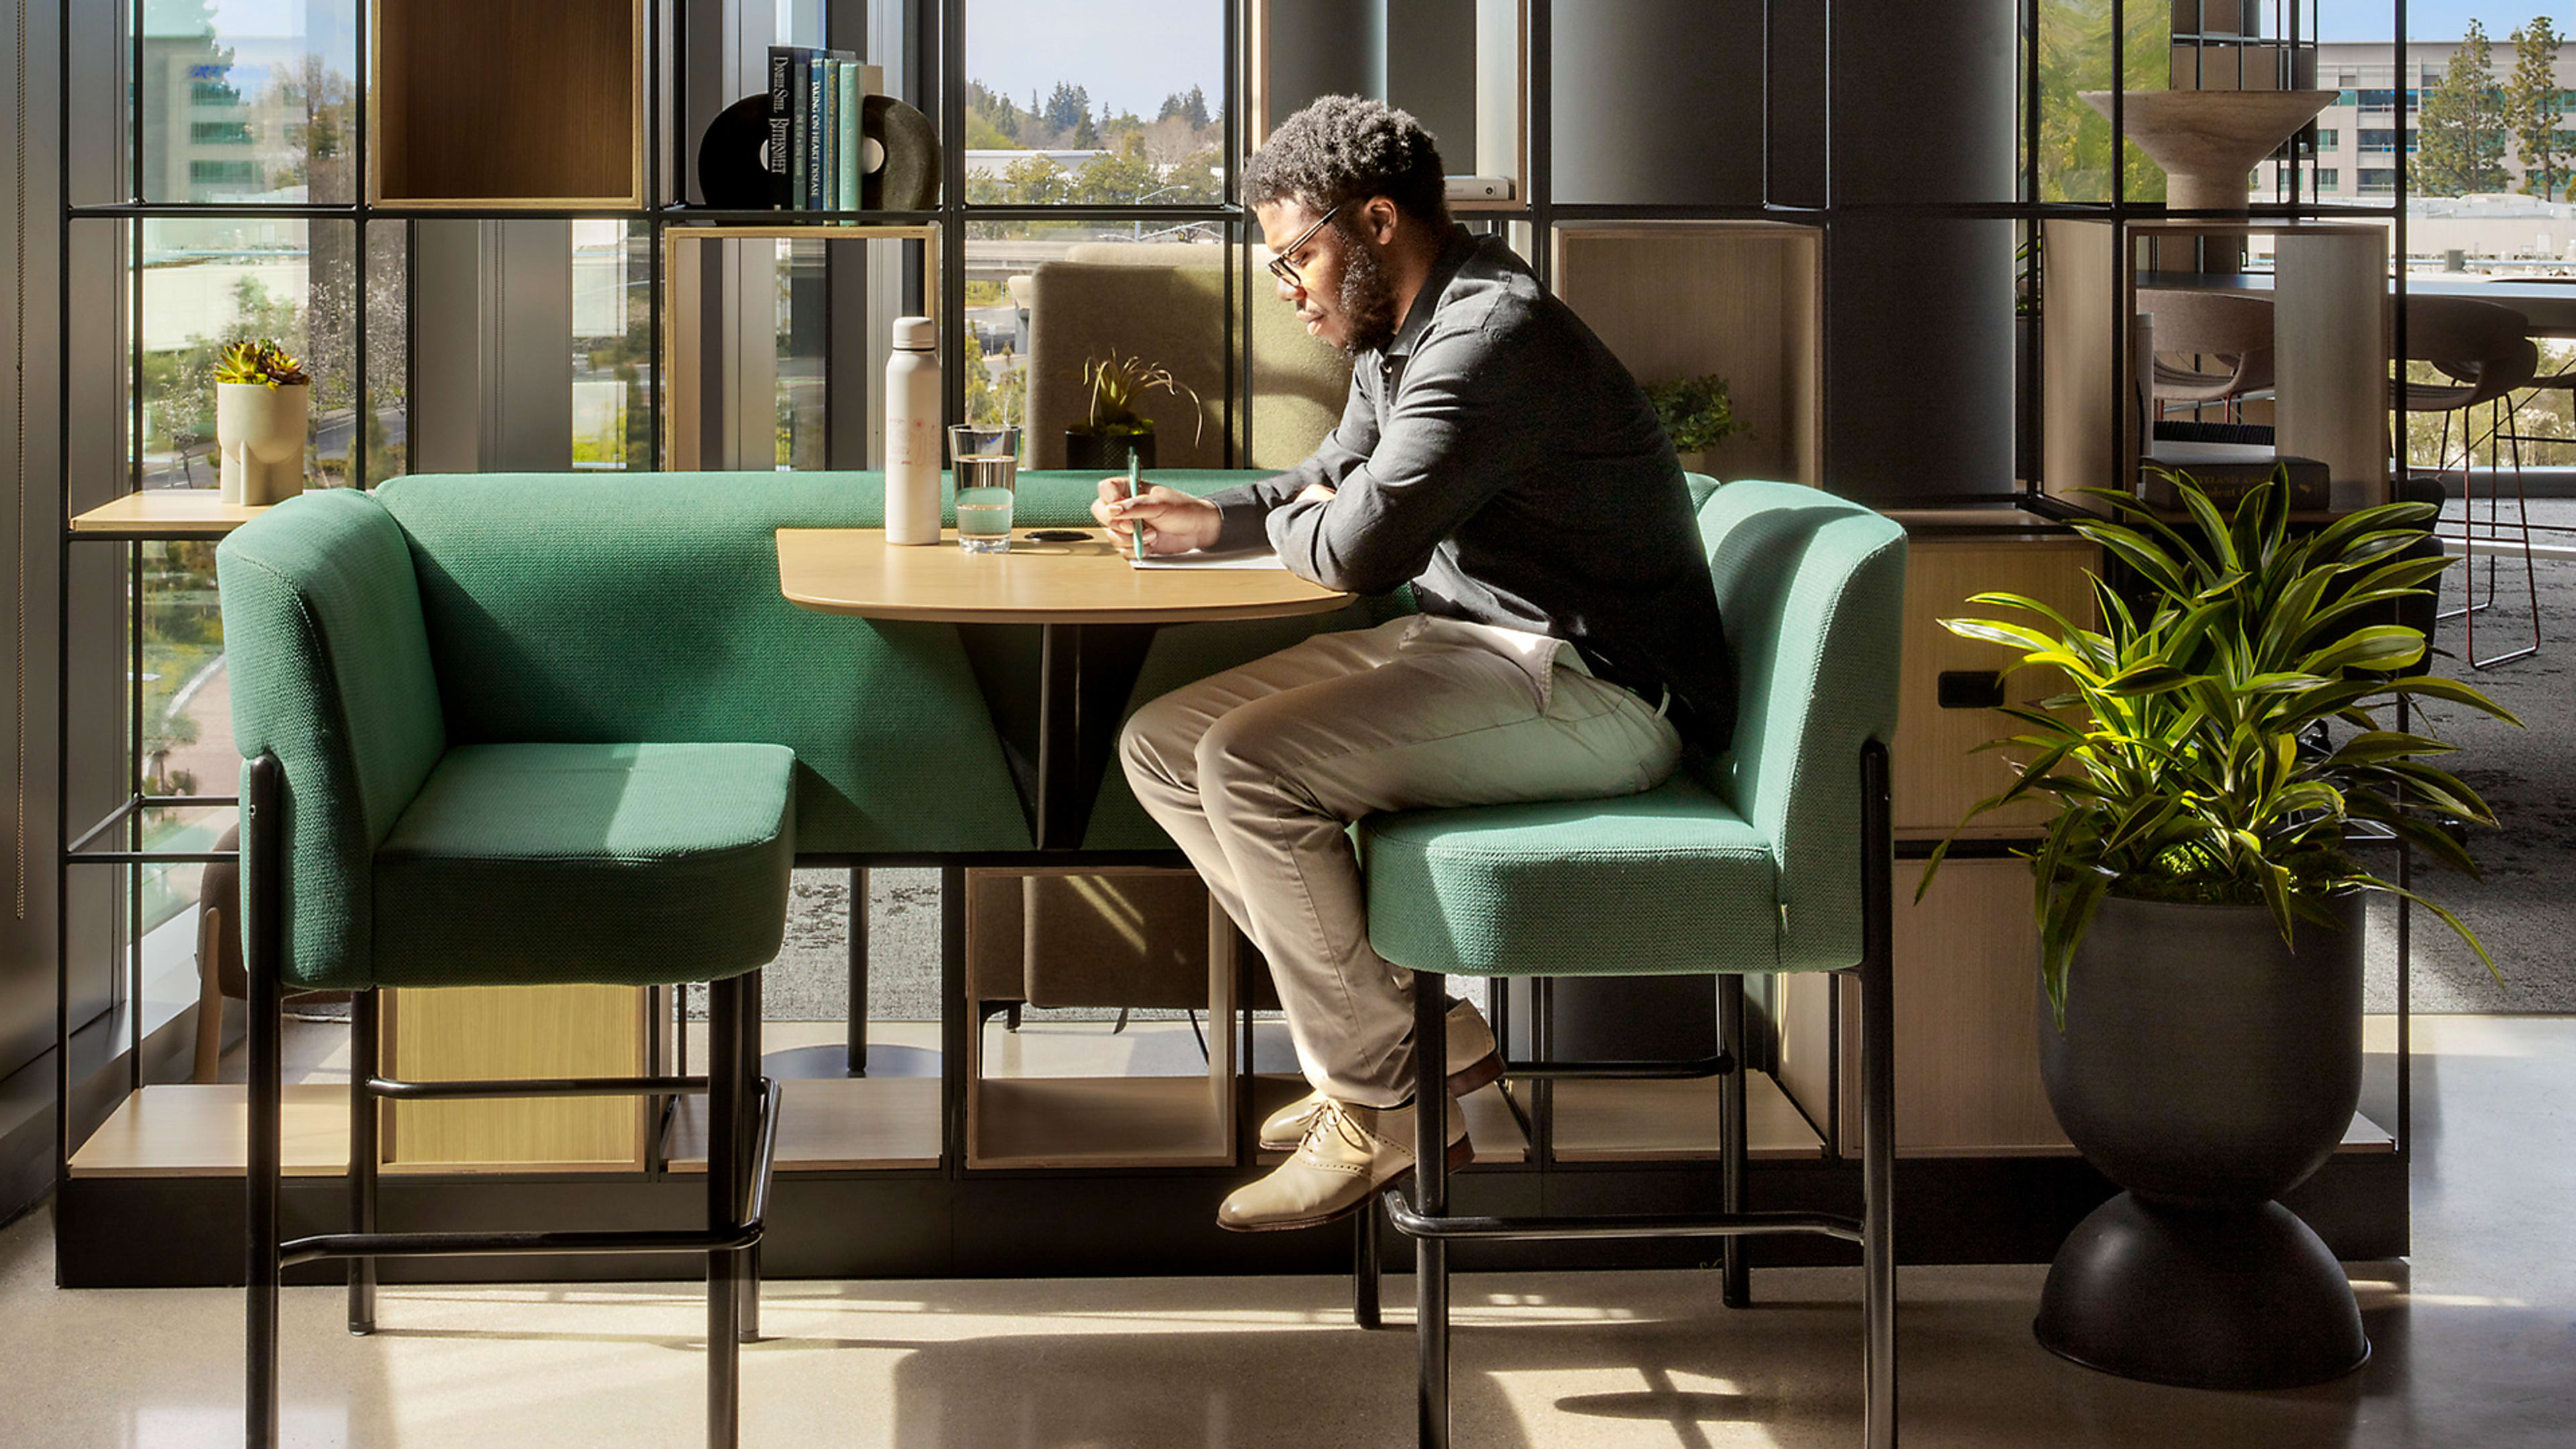 LinkedIn’s new ‘postures matrix’ is shaping how its new headquarters handles hybrid work